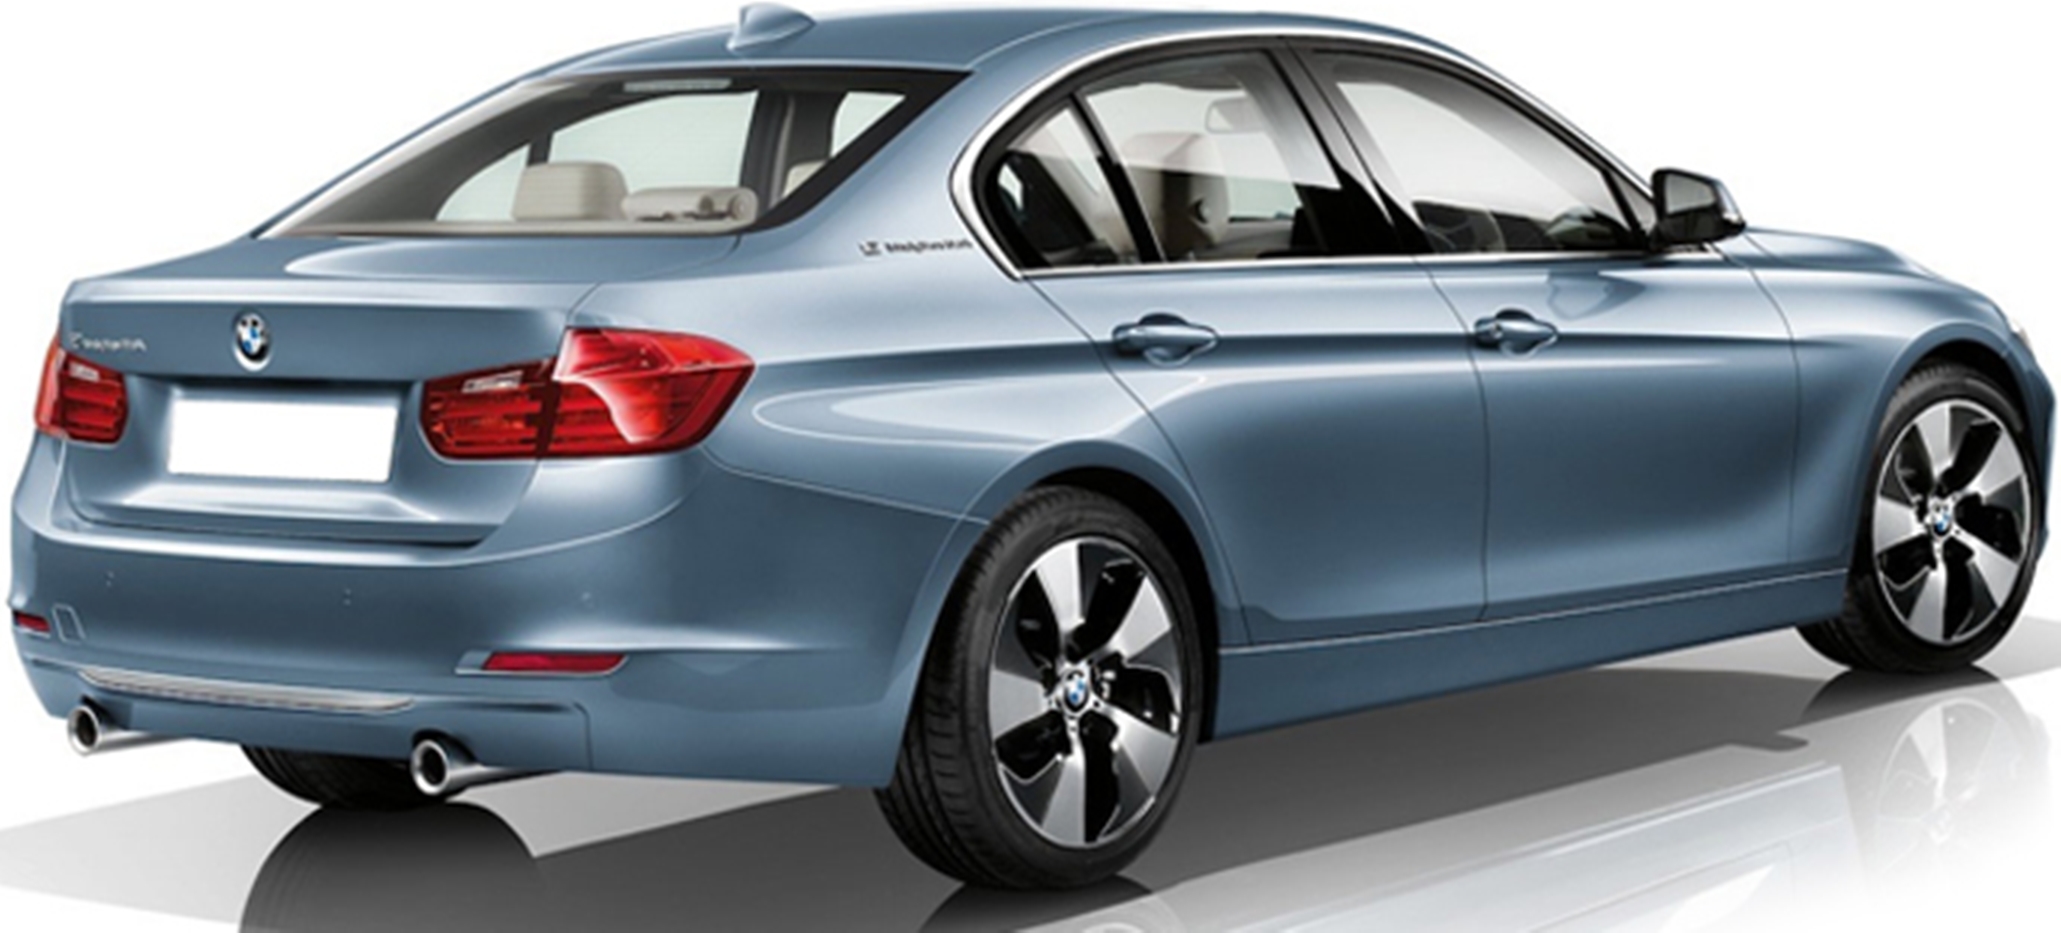 BMW 3 Series 335i Price & Features Mileage Colors Specifications Pictures Reviews